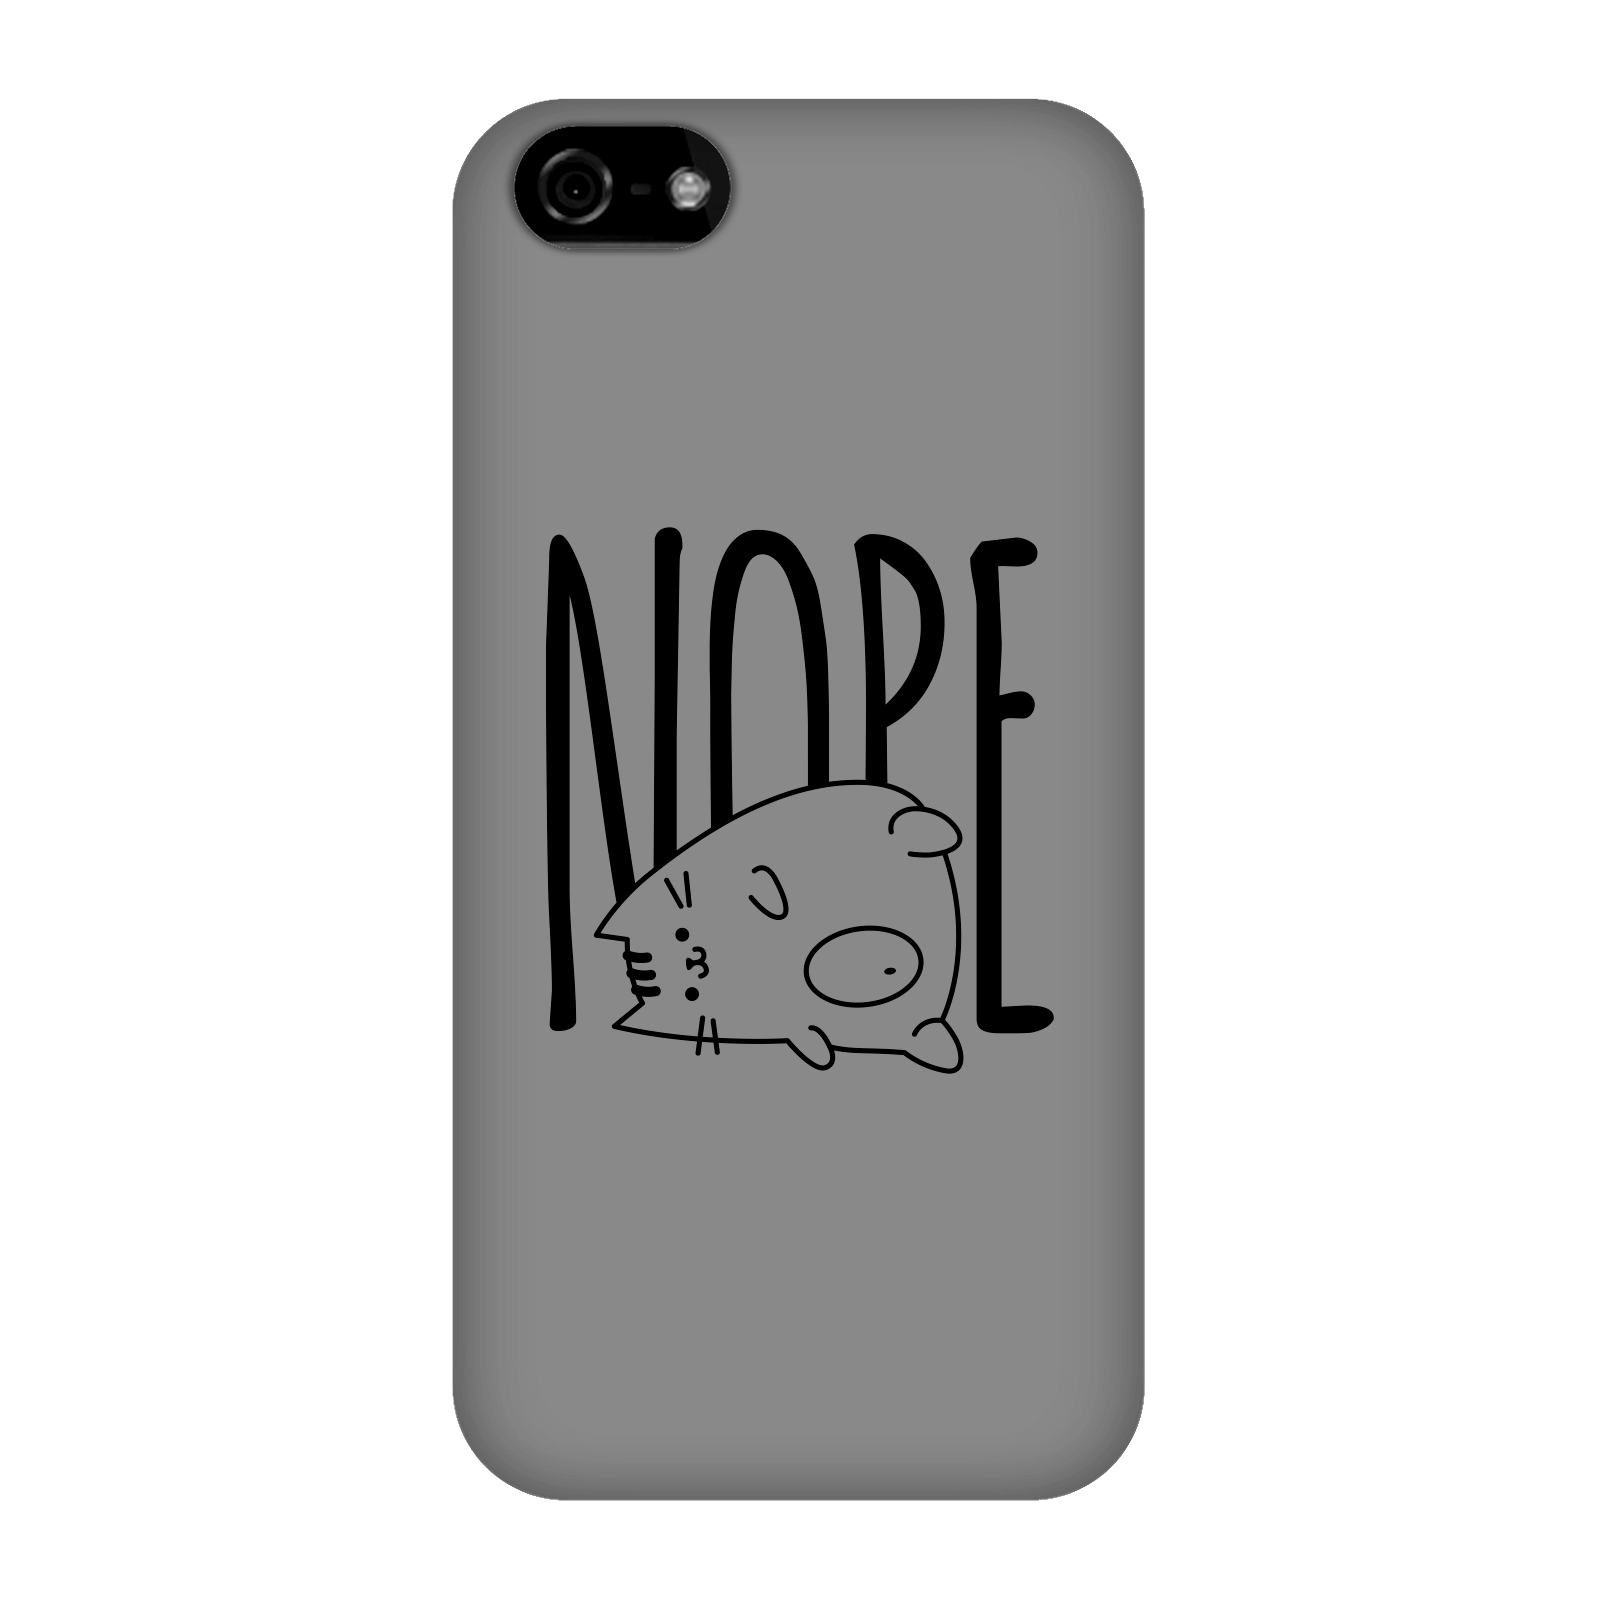 Nope Phone Case for iPhone and Android - iPhone 5C - Snap Case - Gloss